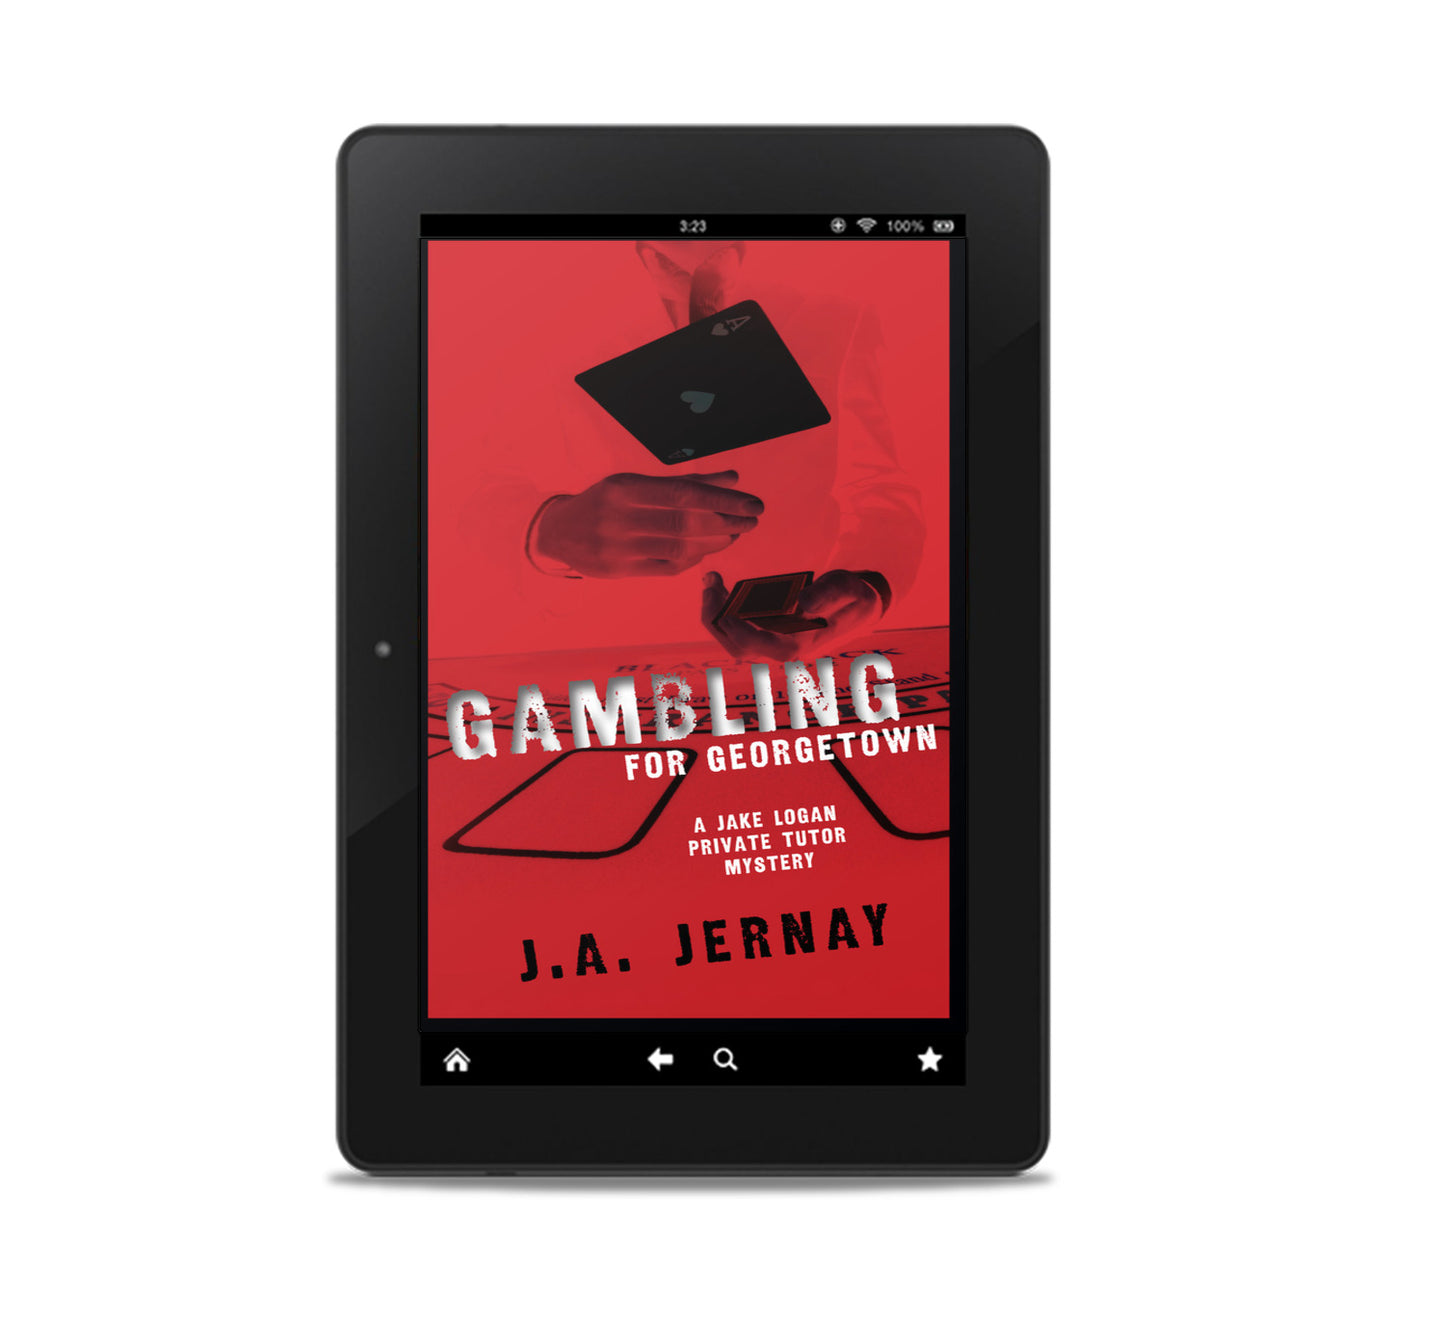 Gambling For Georgetown (A Jake Logan Private Tutor Mystery)